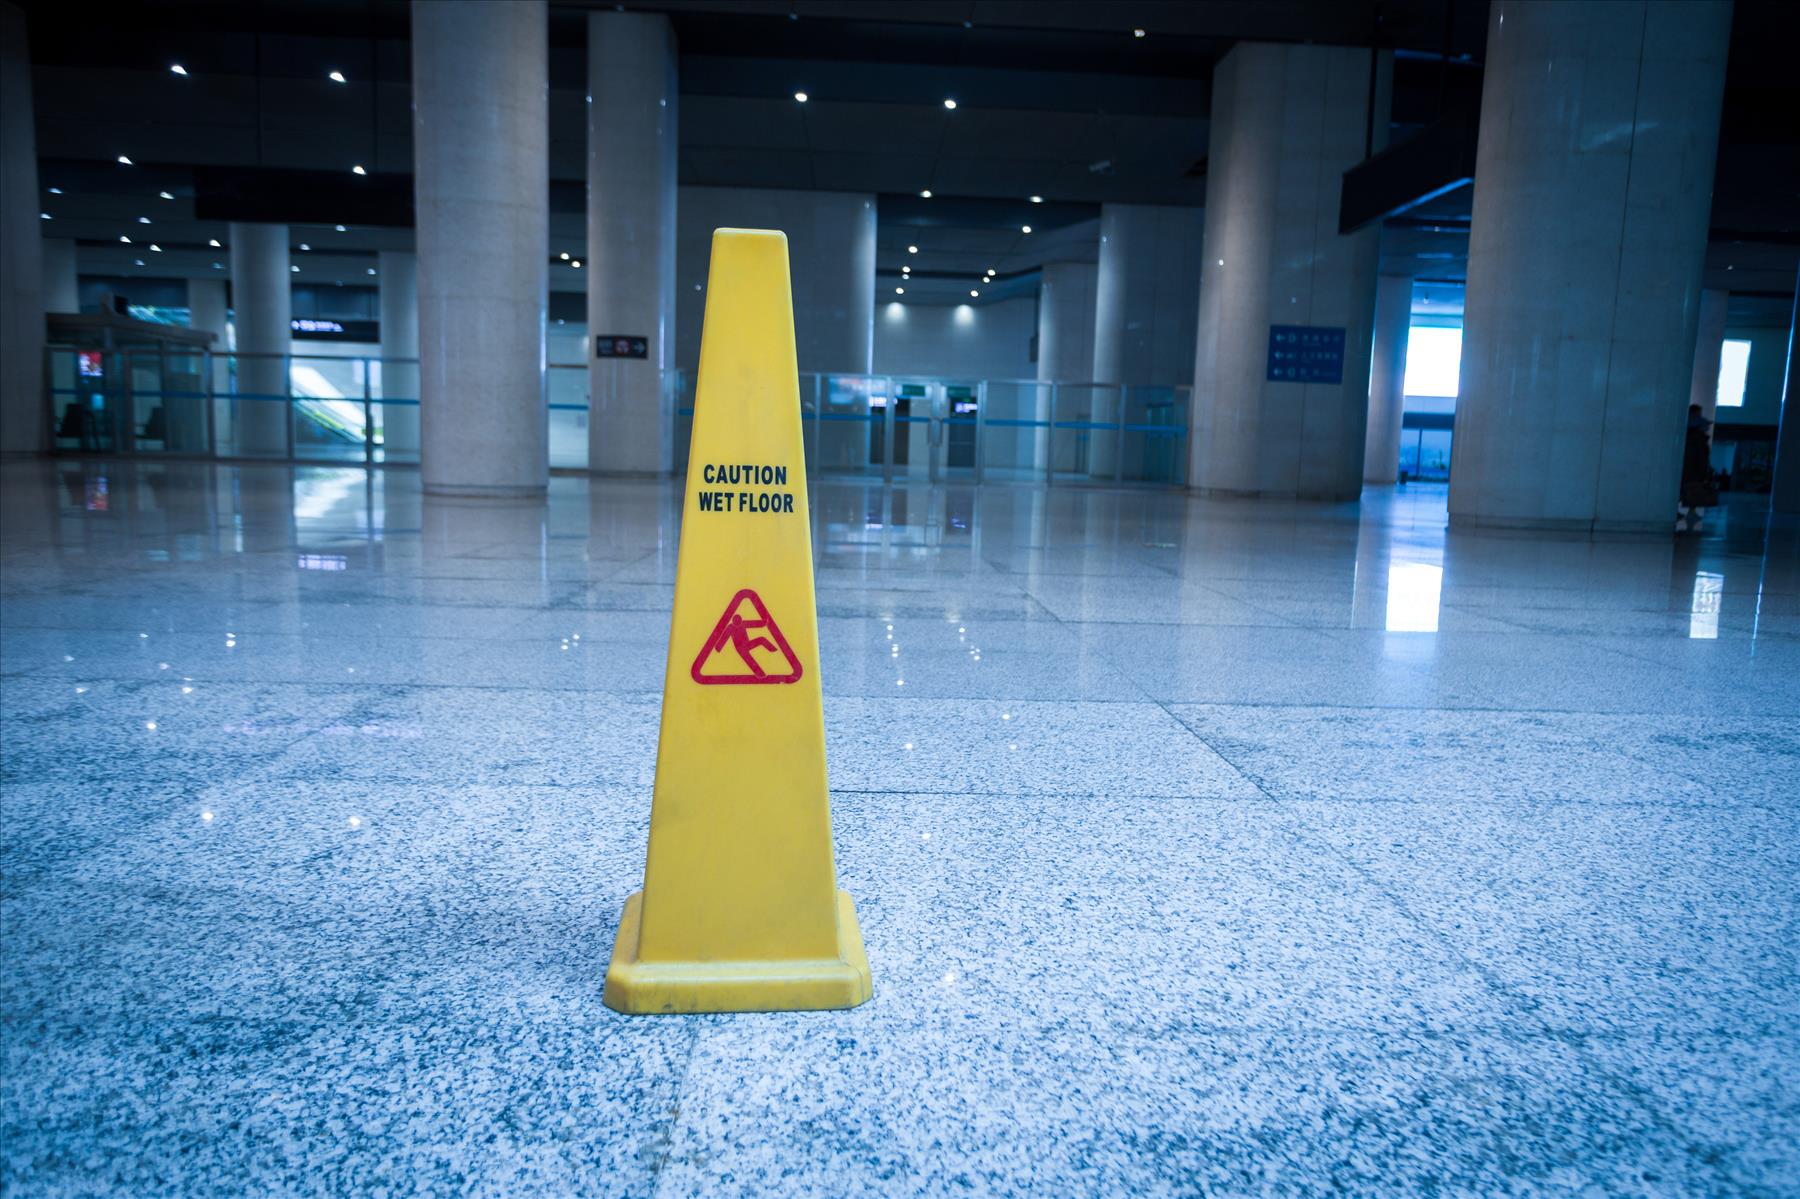 Hiring a Head Injury Lawyer after a Slip and Fall Accident